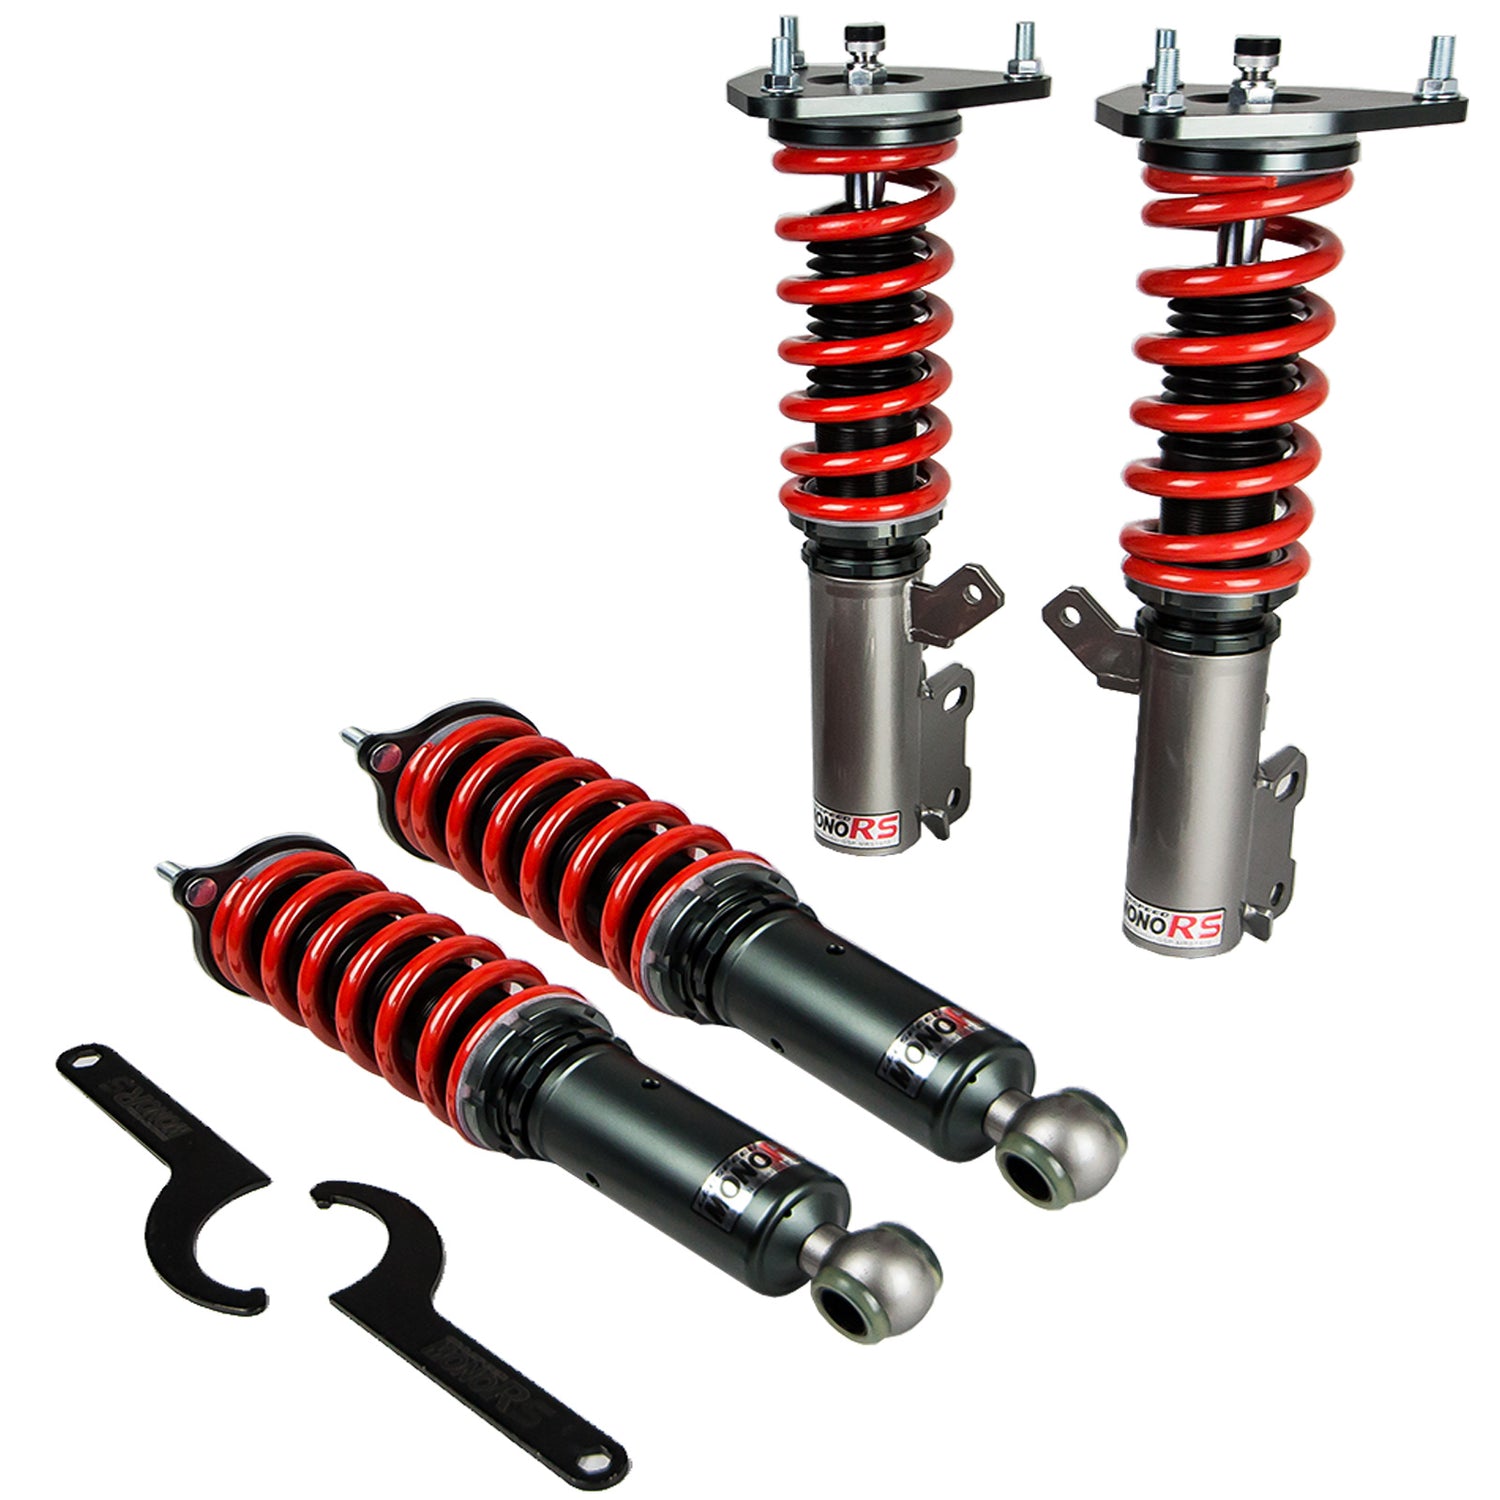 Godspeed MRS1970-A MonoRS Coilover Lowering Kit, 32 Damping Adjustment, Ride Height Adjustable